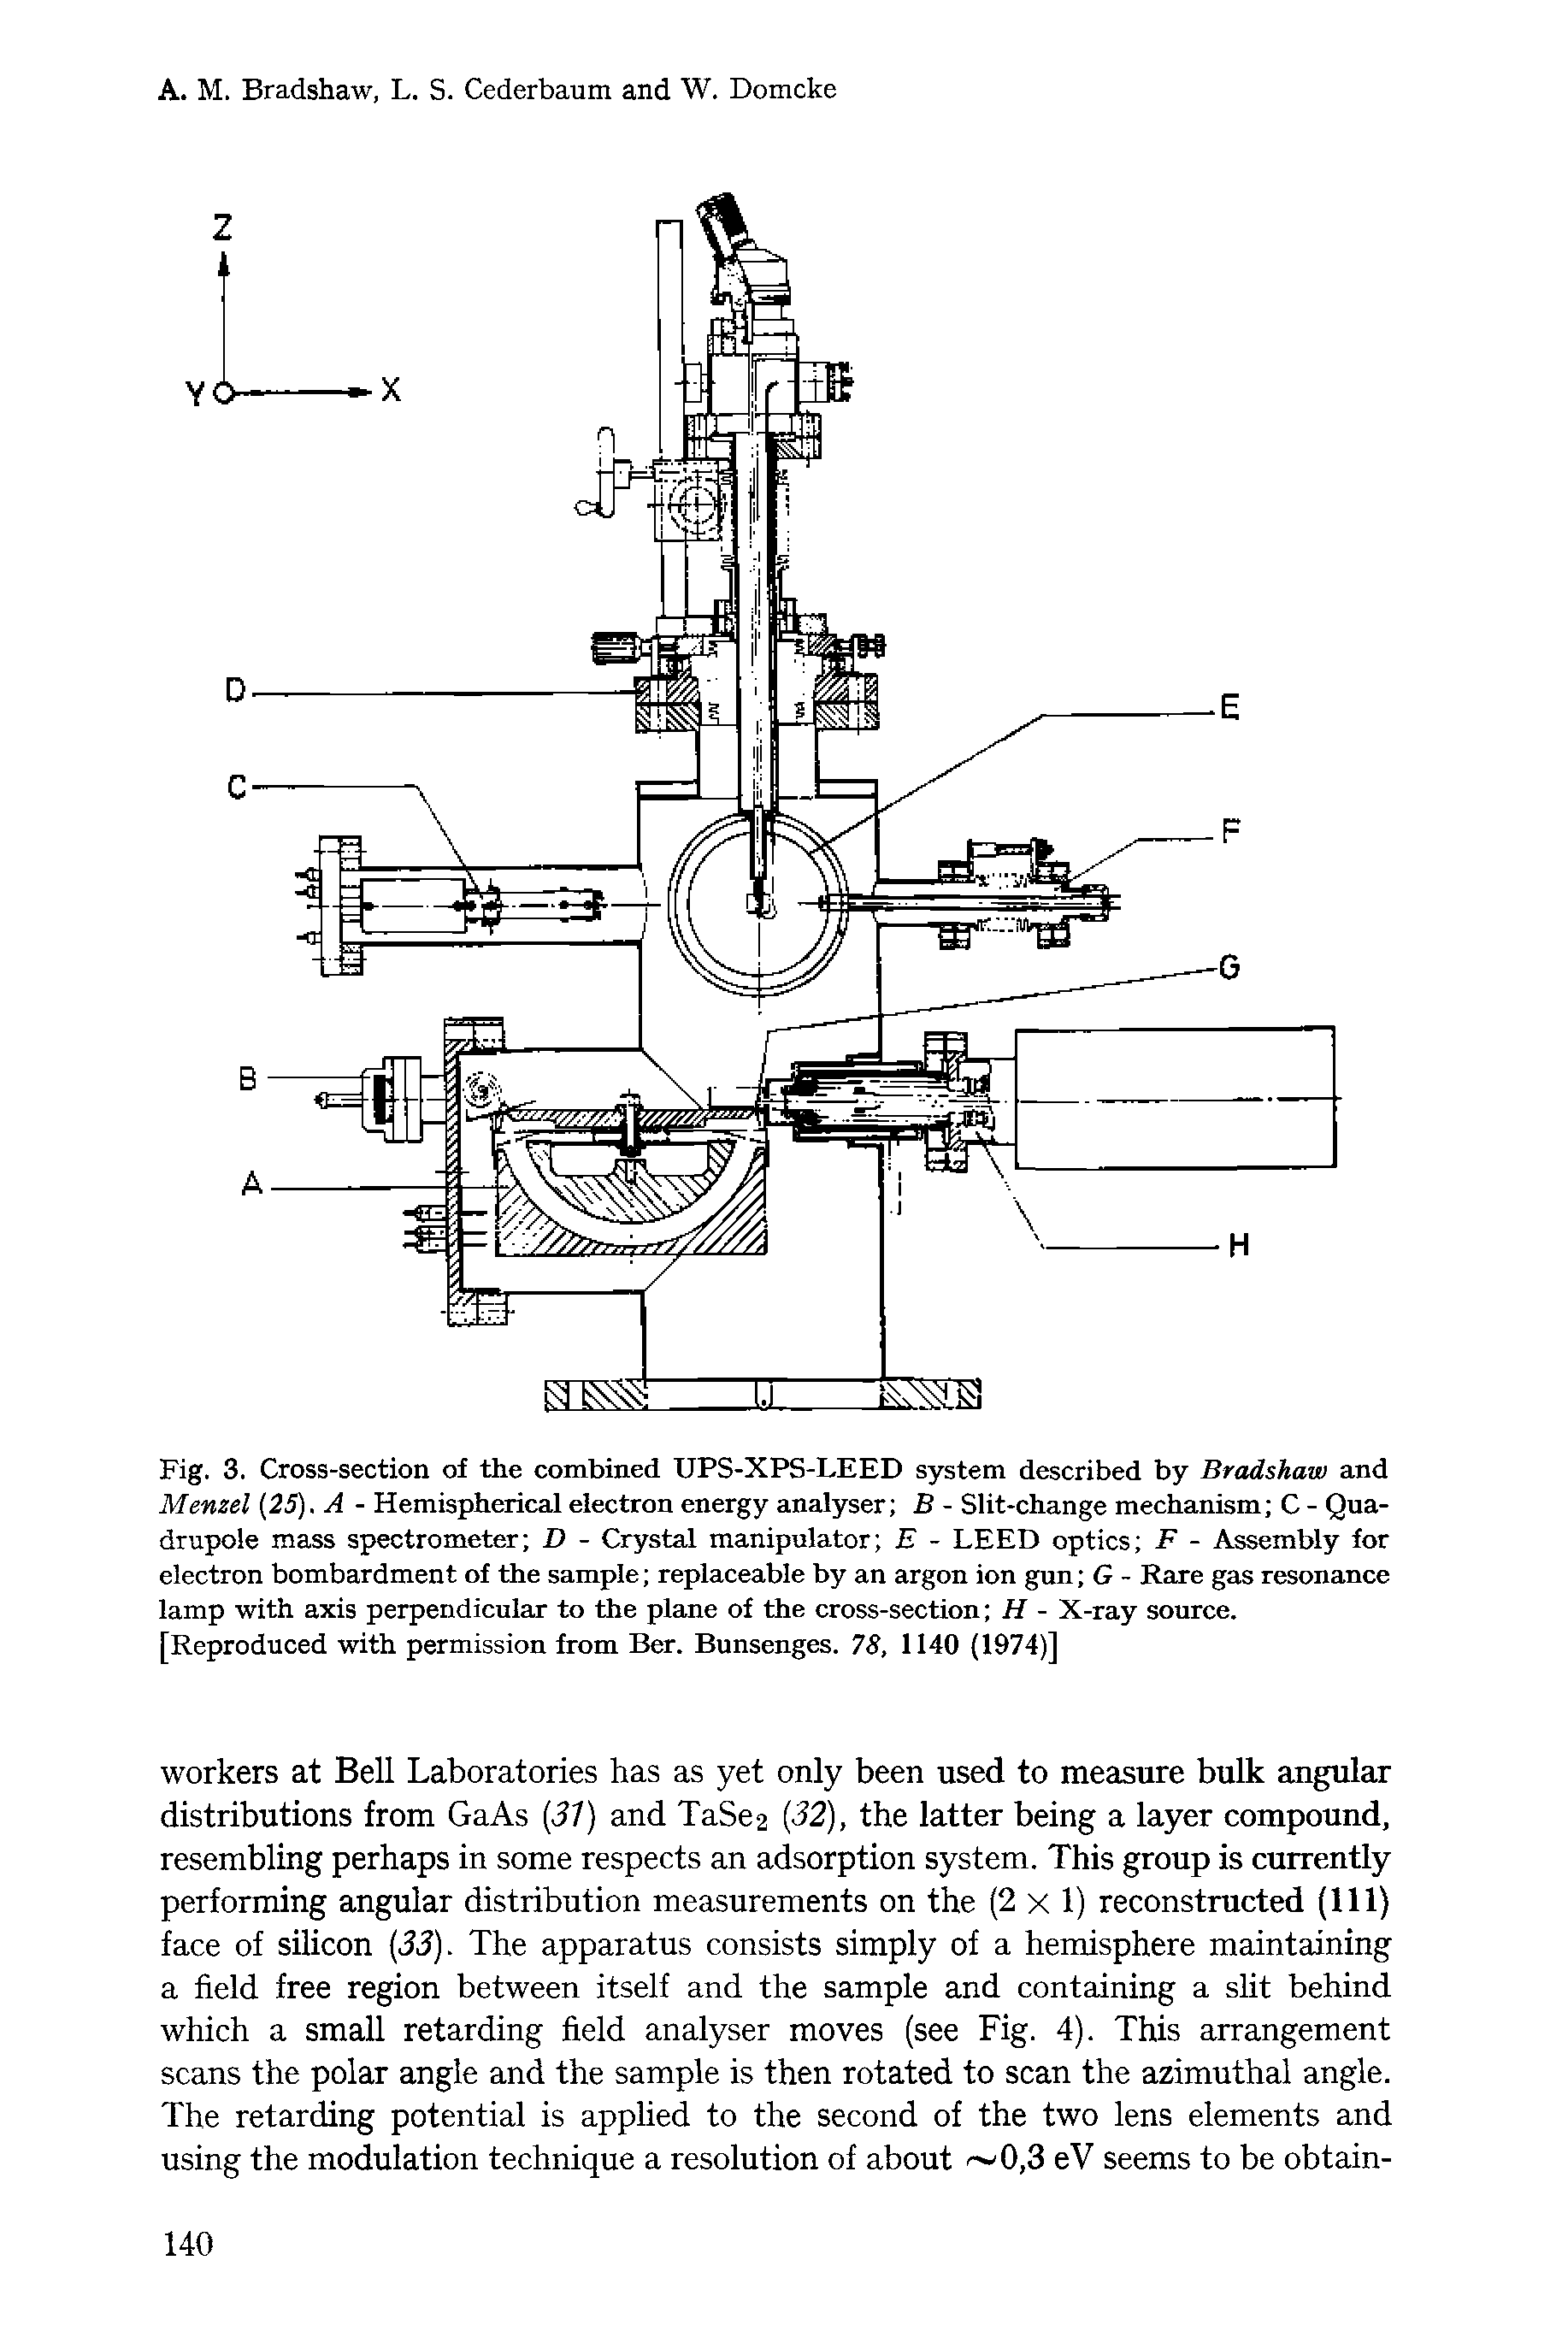 Fig. 3. Cross-section of the combined UPS-XPS-LEED system described by Bradshaw and Menzel (25). A - Hemispherical electron energy analyser B - Slit-change mechanism C - Qua-drupole mass spectrometer D - Crystal manipulator E - LEED optics F - Assembly for electron bombardment of the sample replaceable by an argon ion gun G - Rare gas resonance lamp with axis perpendicular to the plane of the cross-section H - X-ray source. [Reproduced with permission from Ber. Bunsenges. 78, 1140 (1974)]...